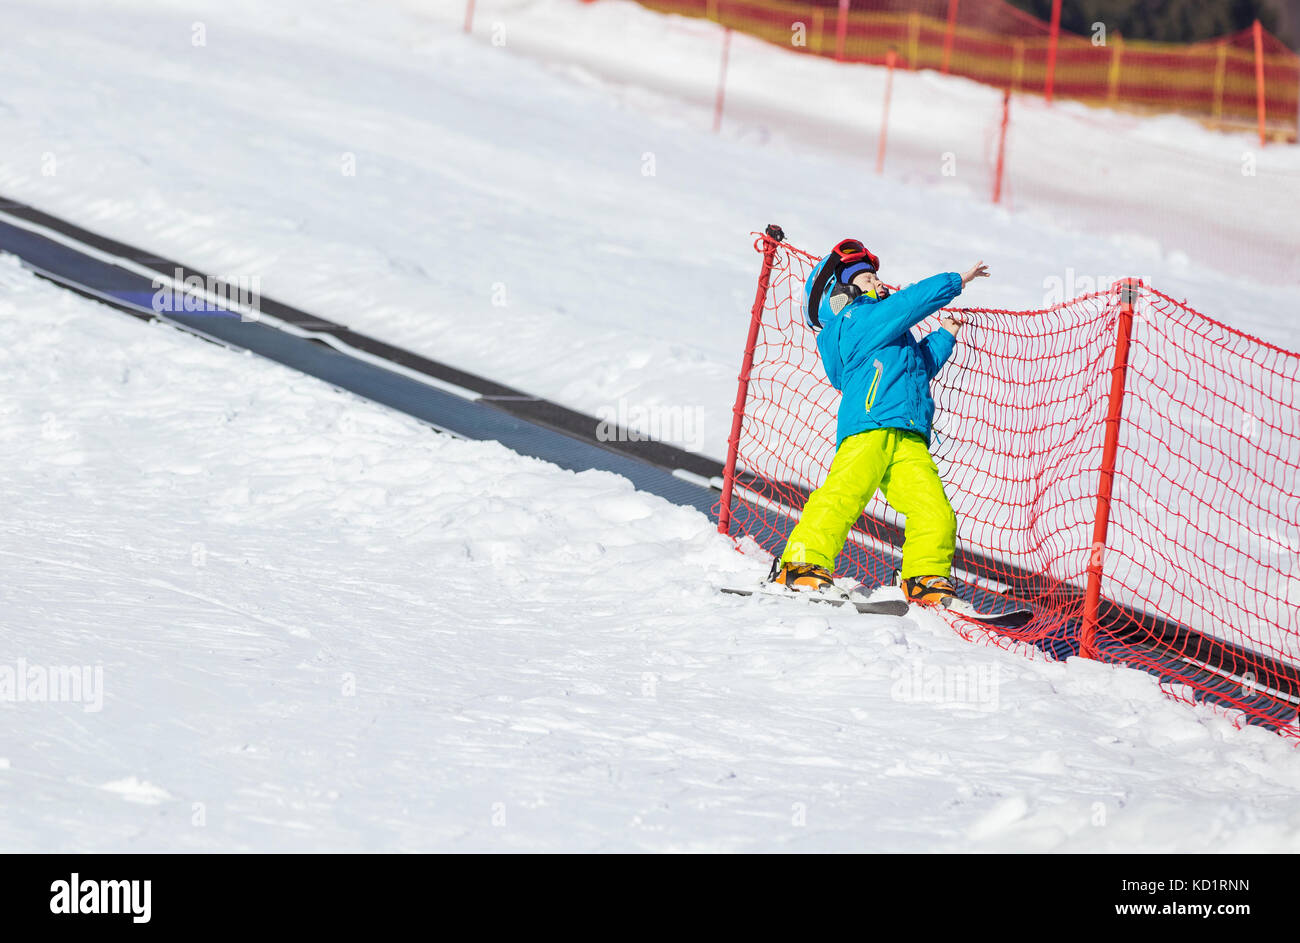 Little boy falling down while skiing in children's area on winter resort Stock Photo